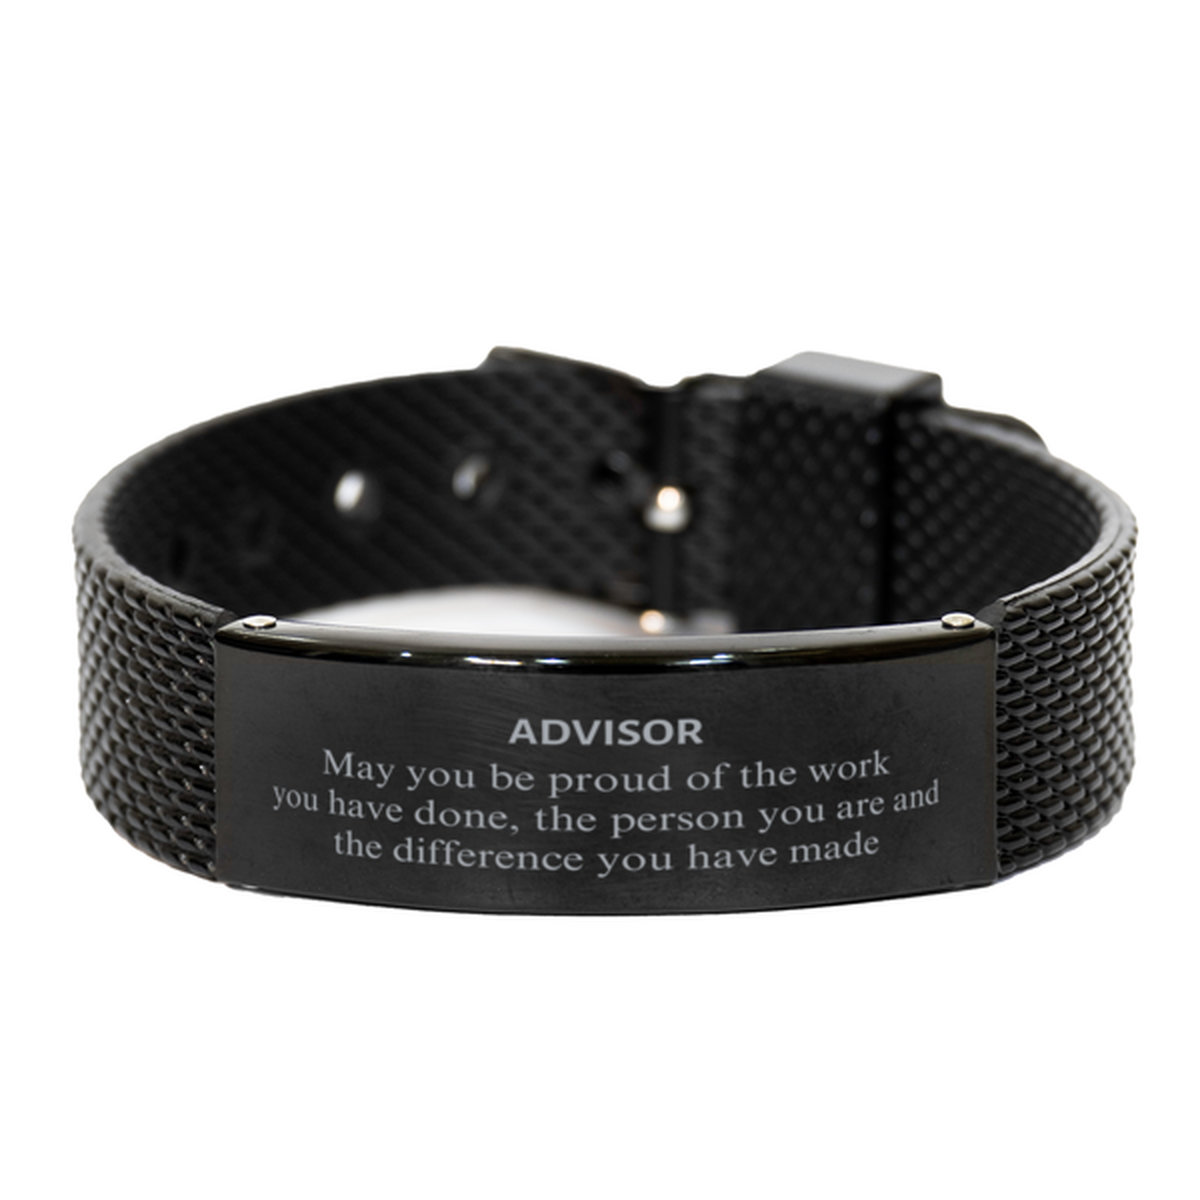 Advisor May you be proud of the work you have done, Retirement Advisor Black Shark Mesh Bracelet for Colleague Appreciation Gifts Amazing for Advisor